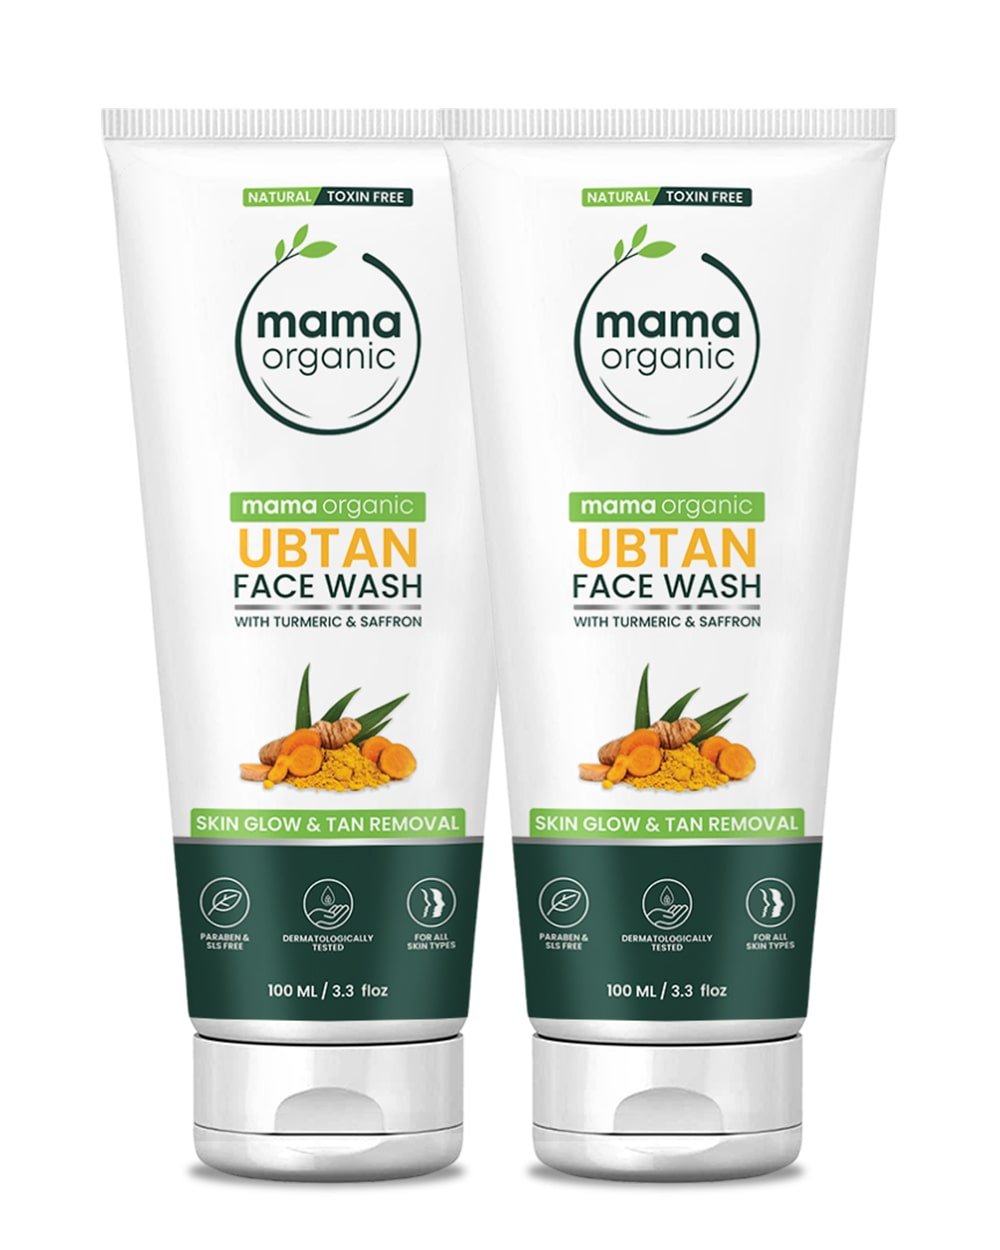 Ubtan Face Wash 100ml Combo For Improves Skin Texture - Natural & Toxin-Free - MamaOrganic